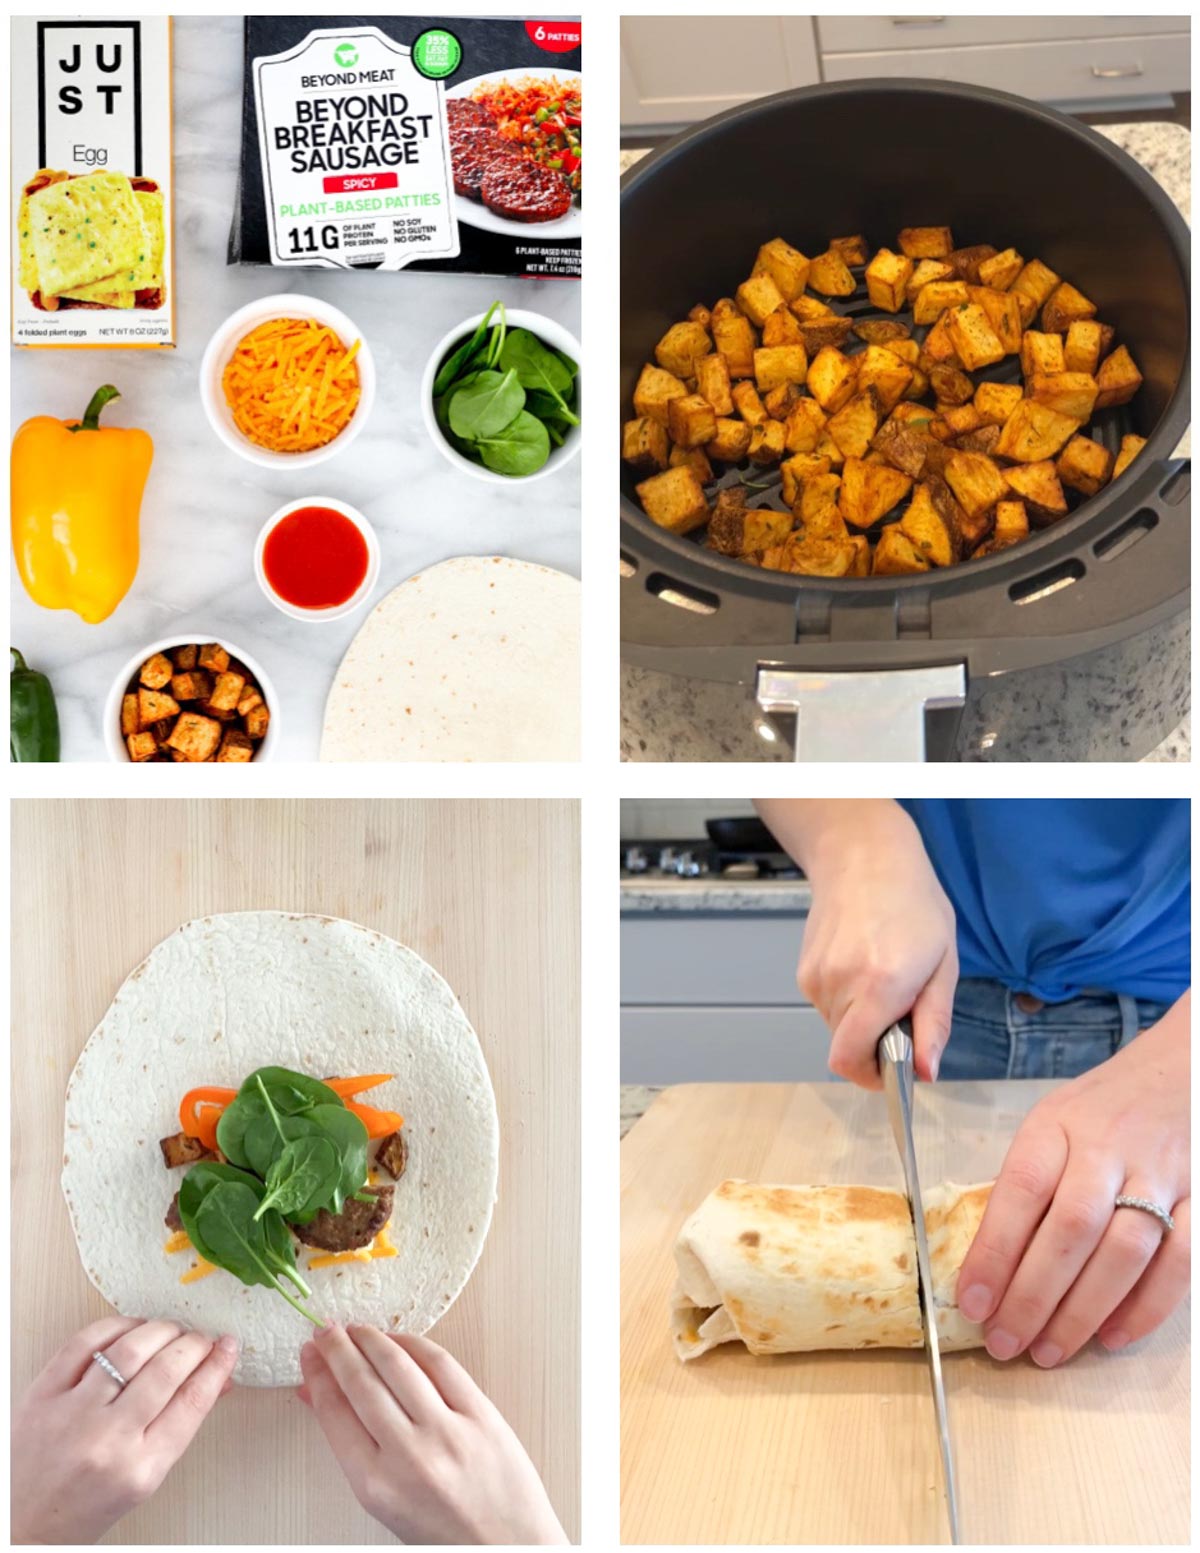 Step by step pictures including a picture of burrito ingredients, air fryer potatoes, wrapping a burrito, and sliced a burrito